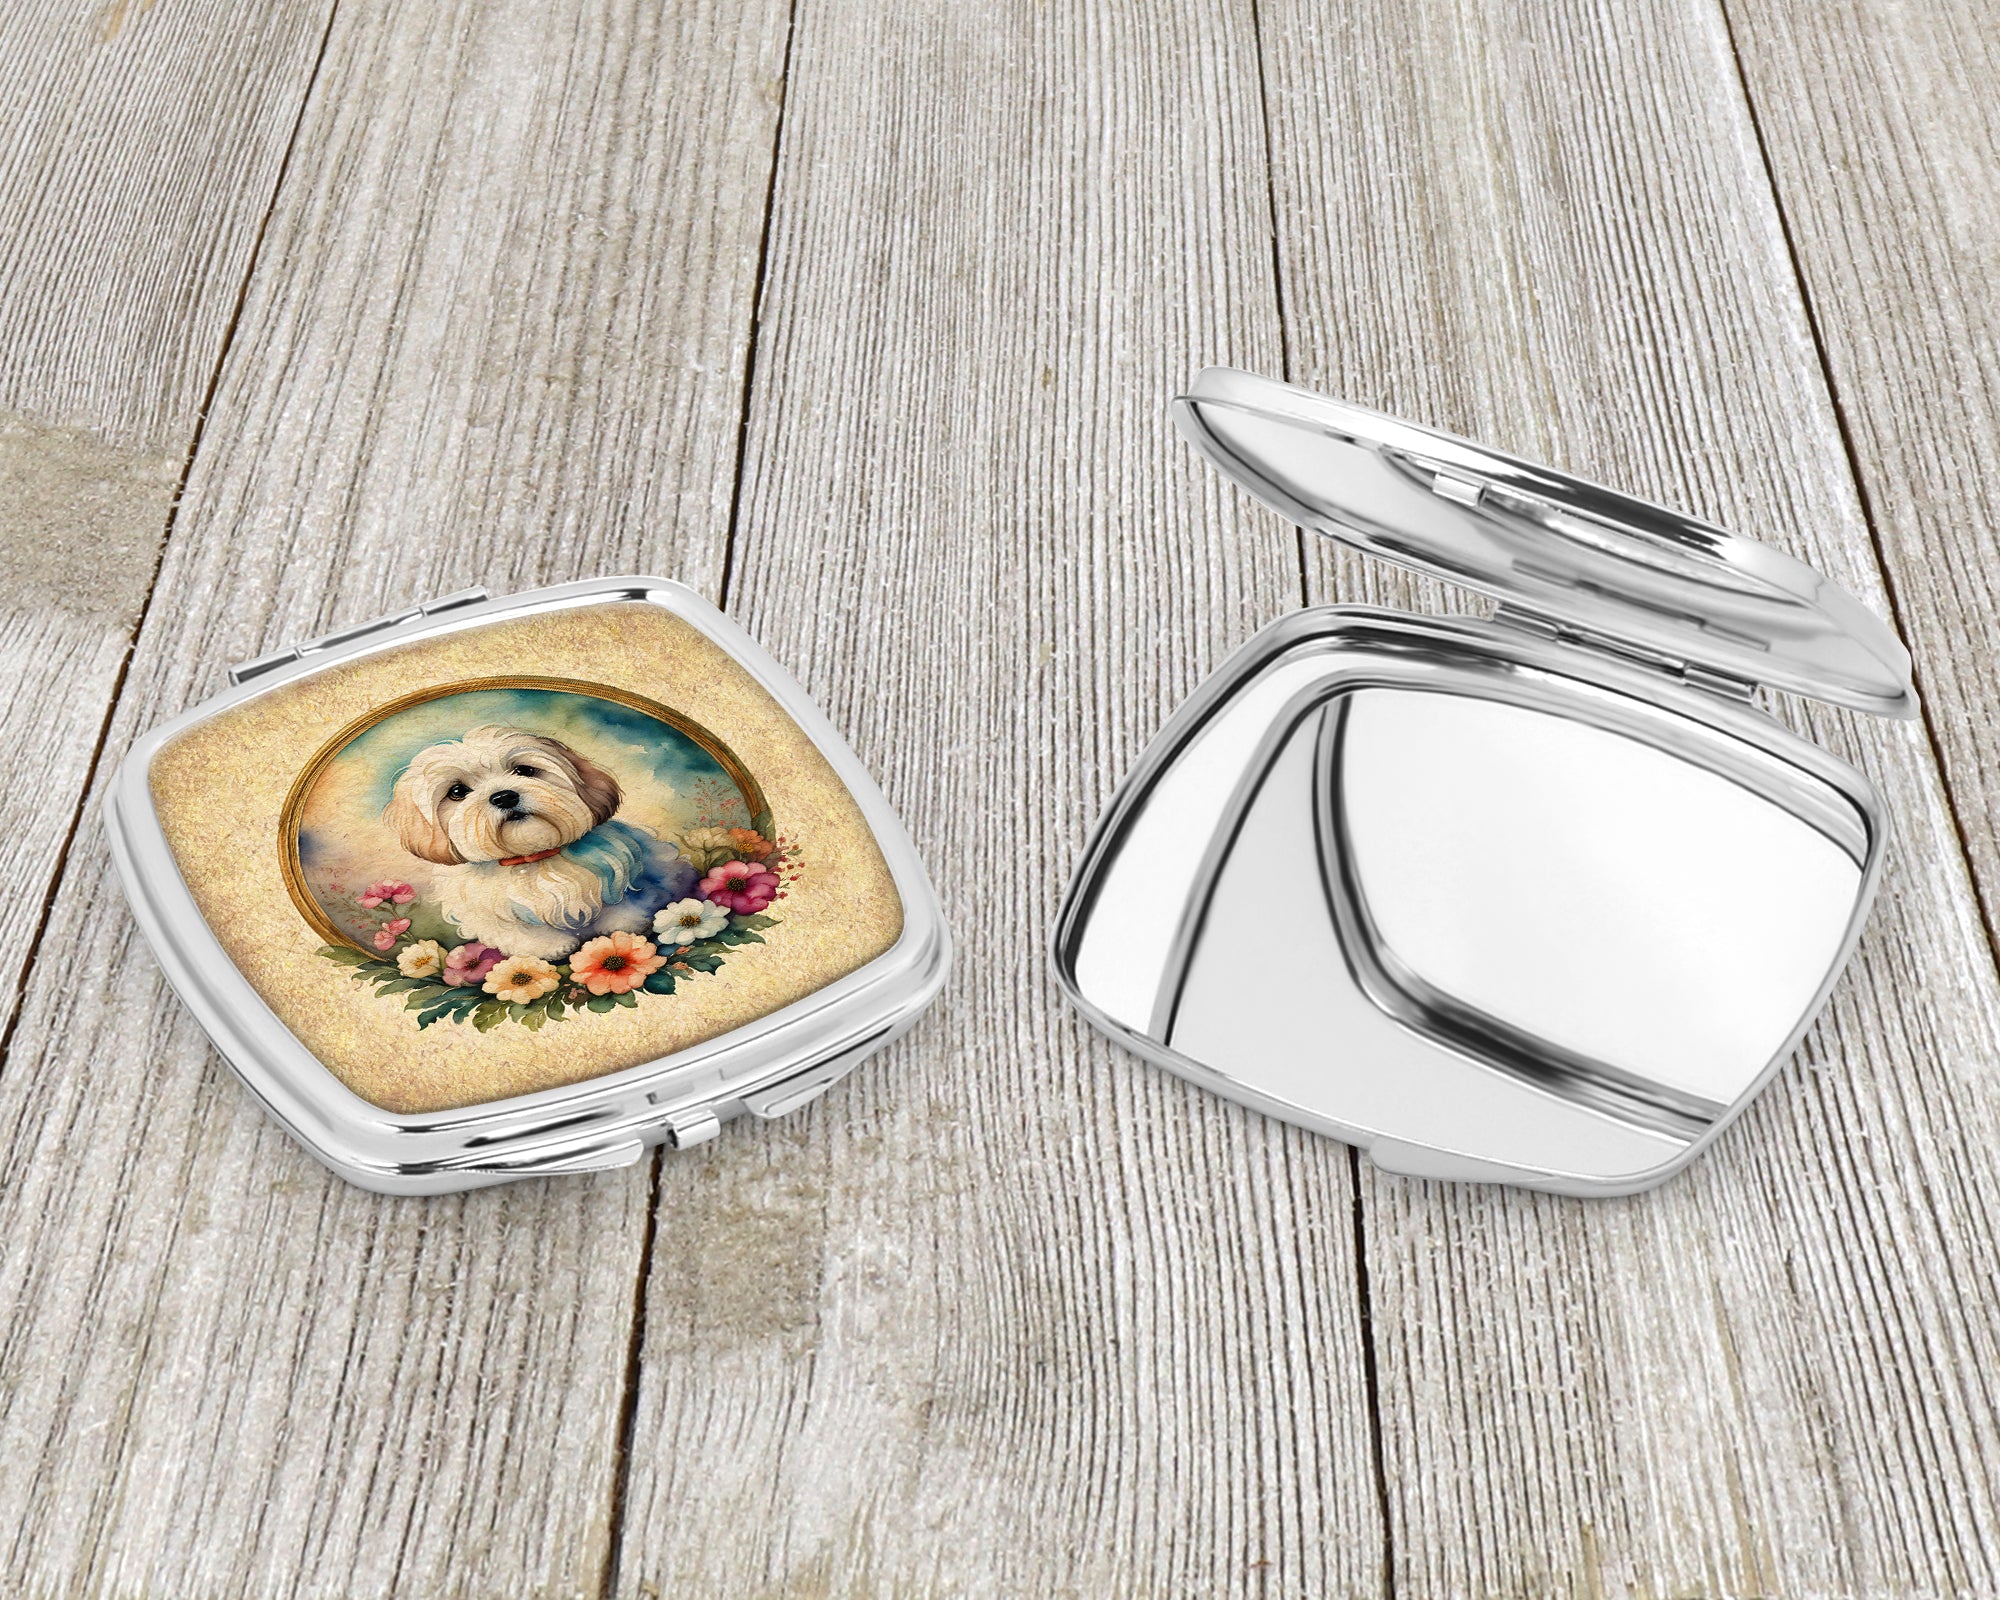 Coton De Tulear and Flowers Compact Mirror